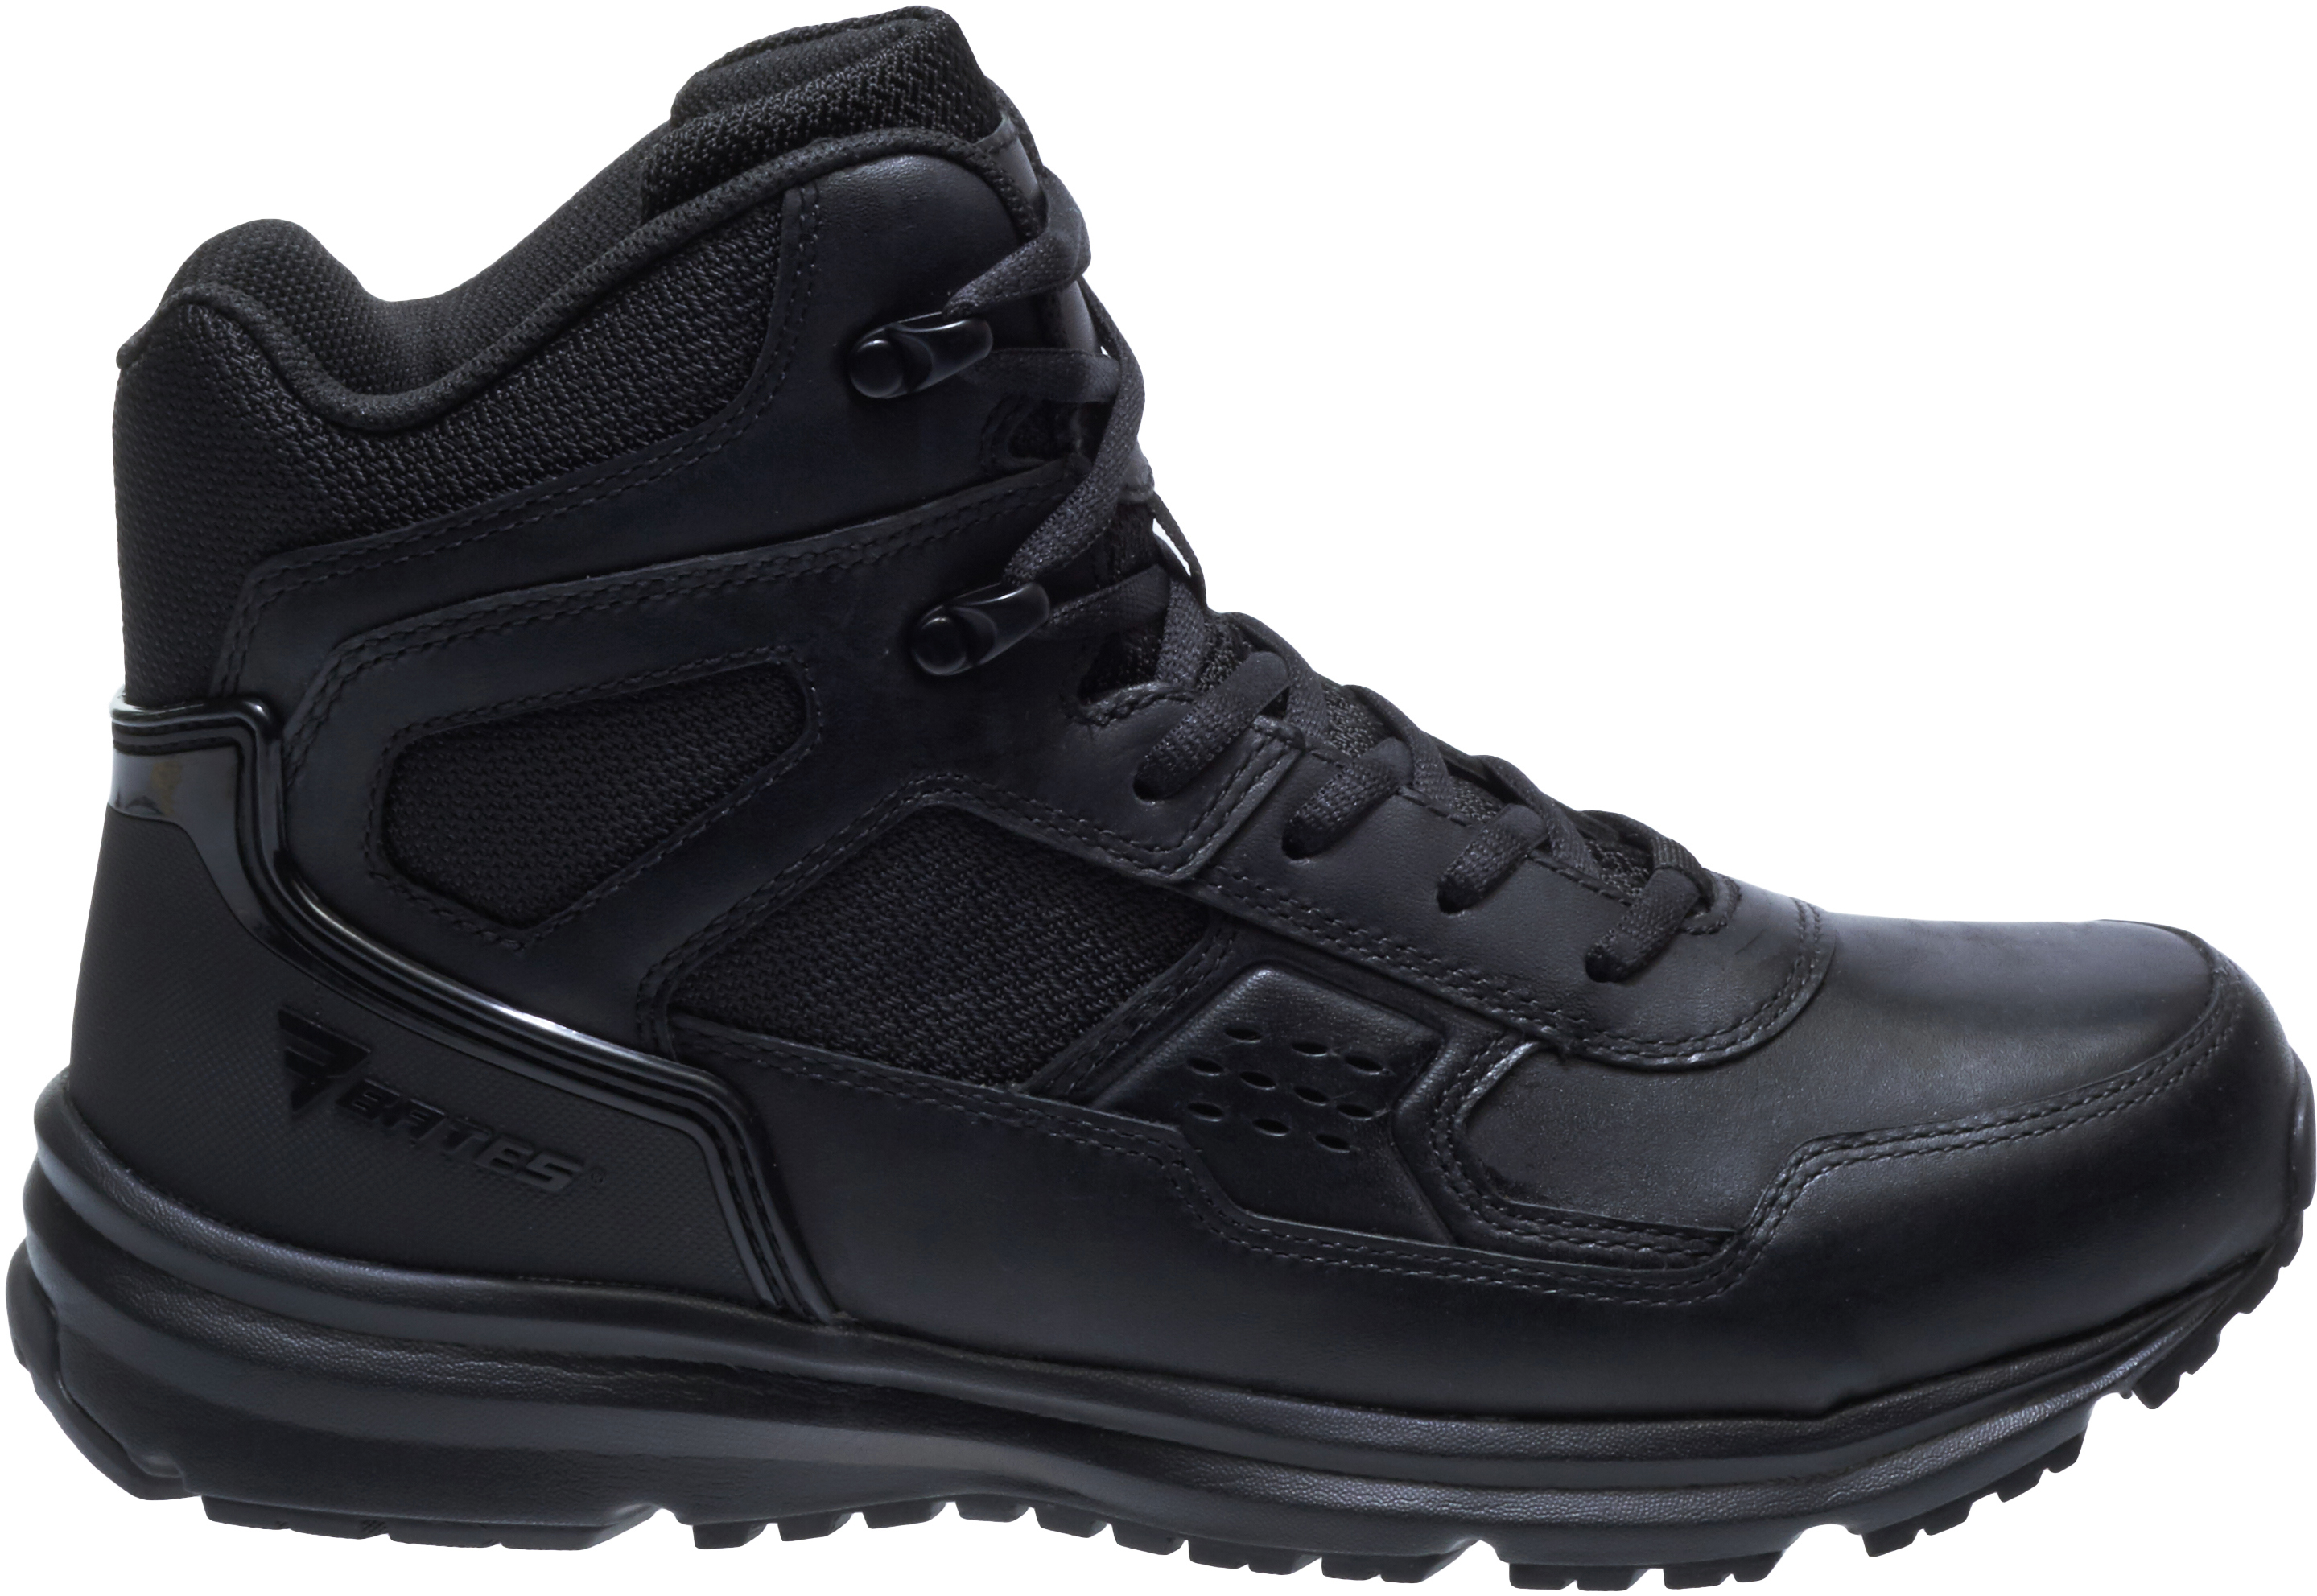 E0511 Bates Men's Raide Sport Mid Fire and Safety Boot Leather 